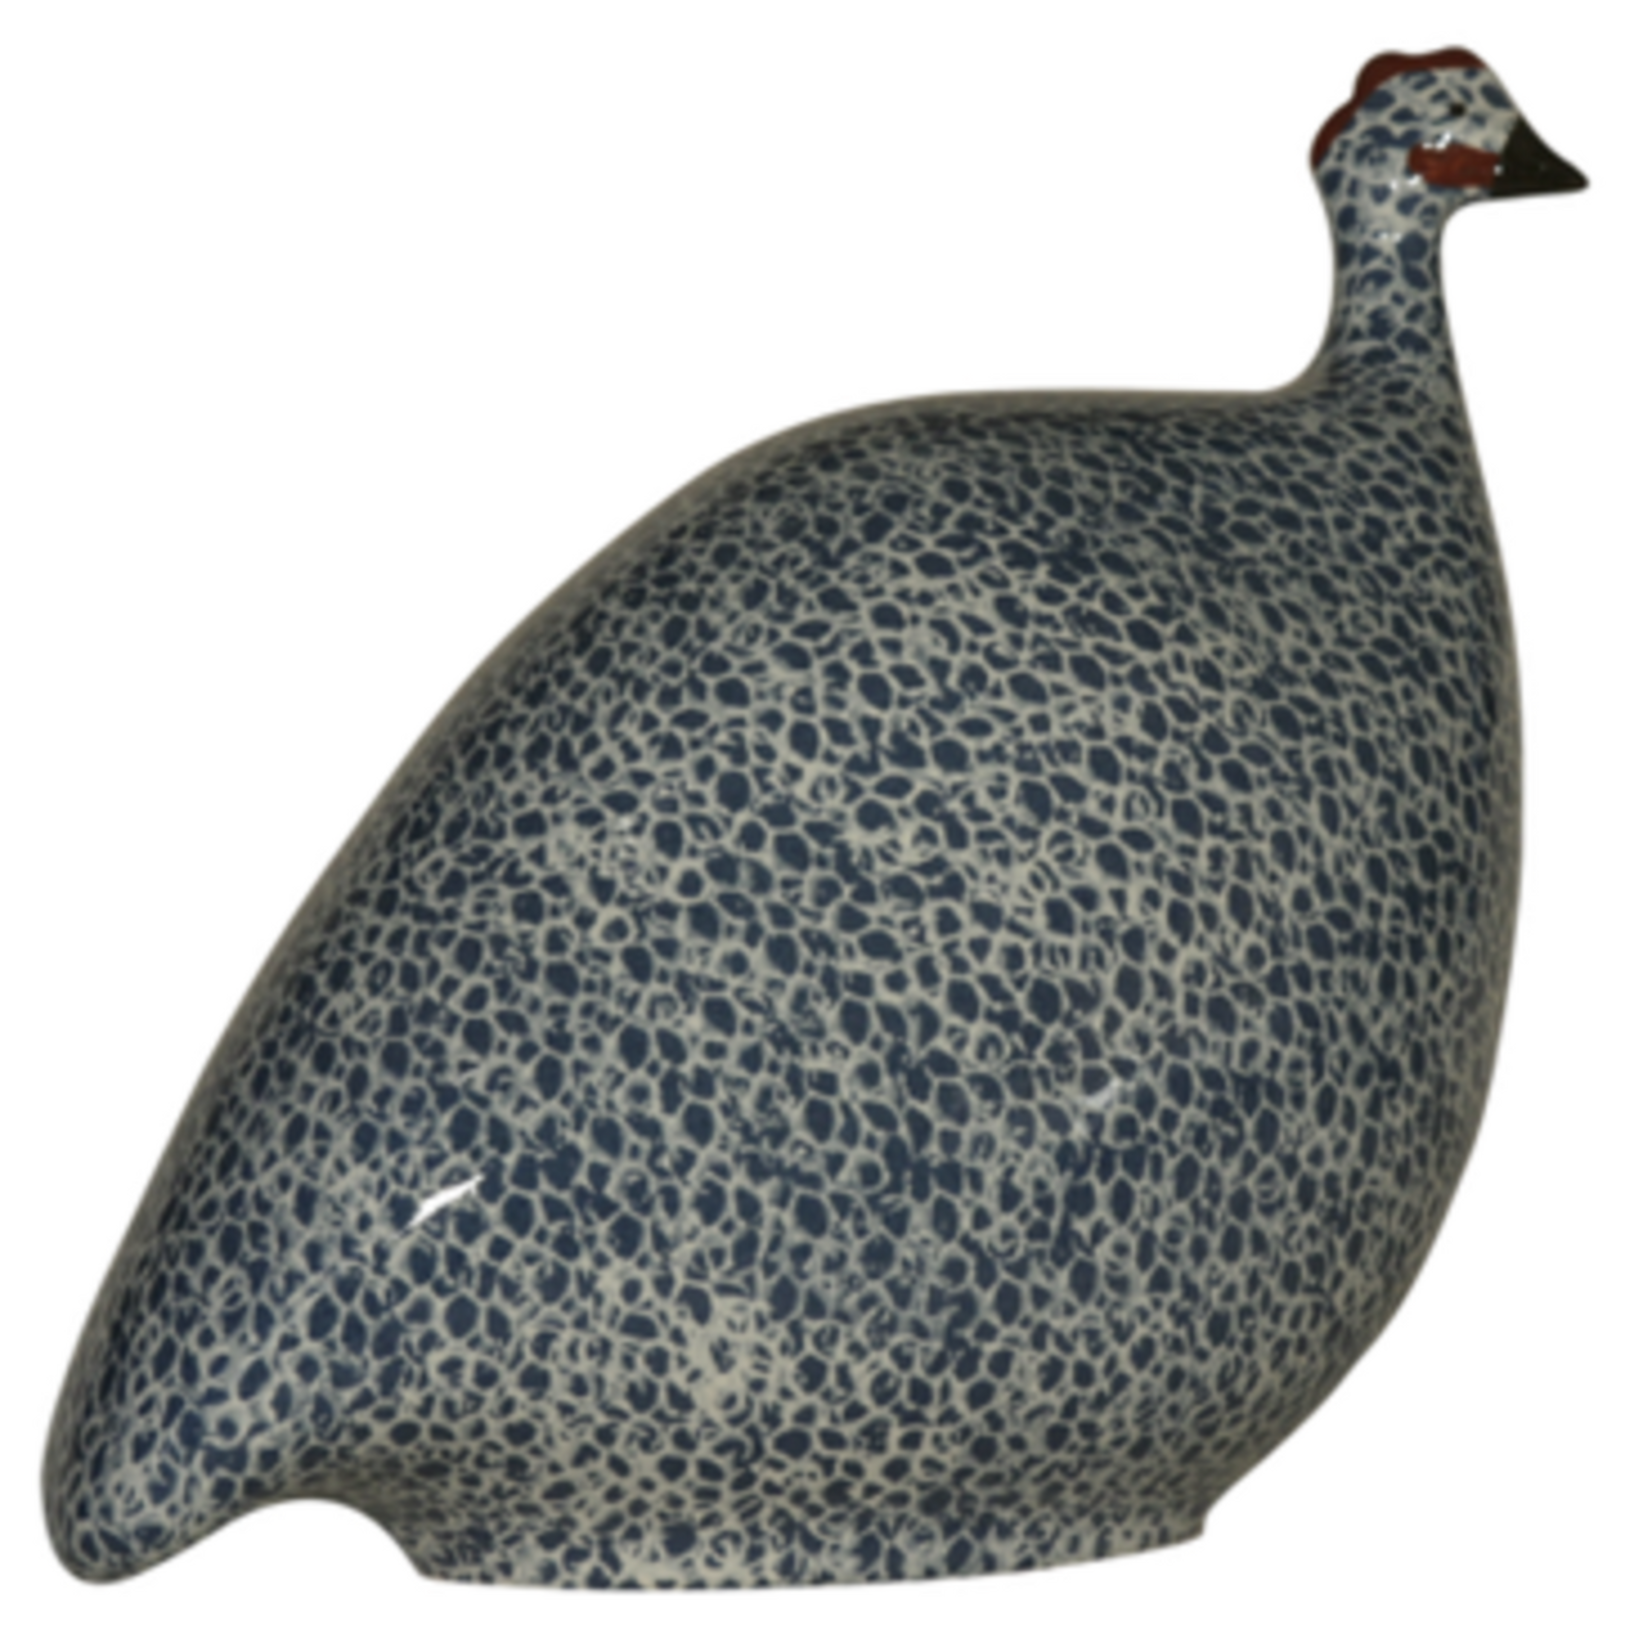 Electric Blue Speckled White French Guinea Hen